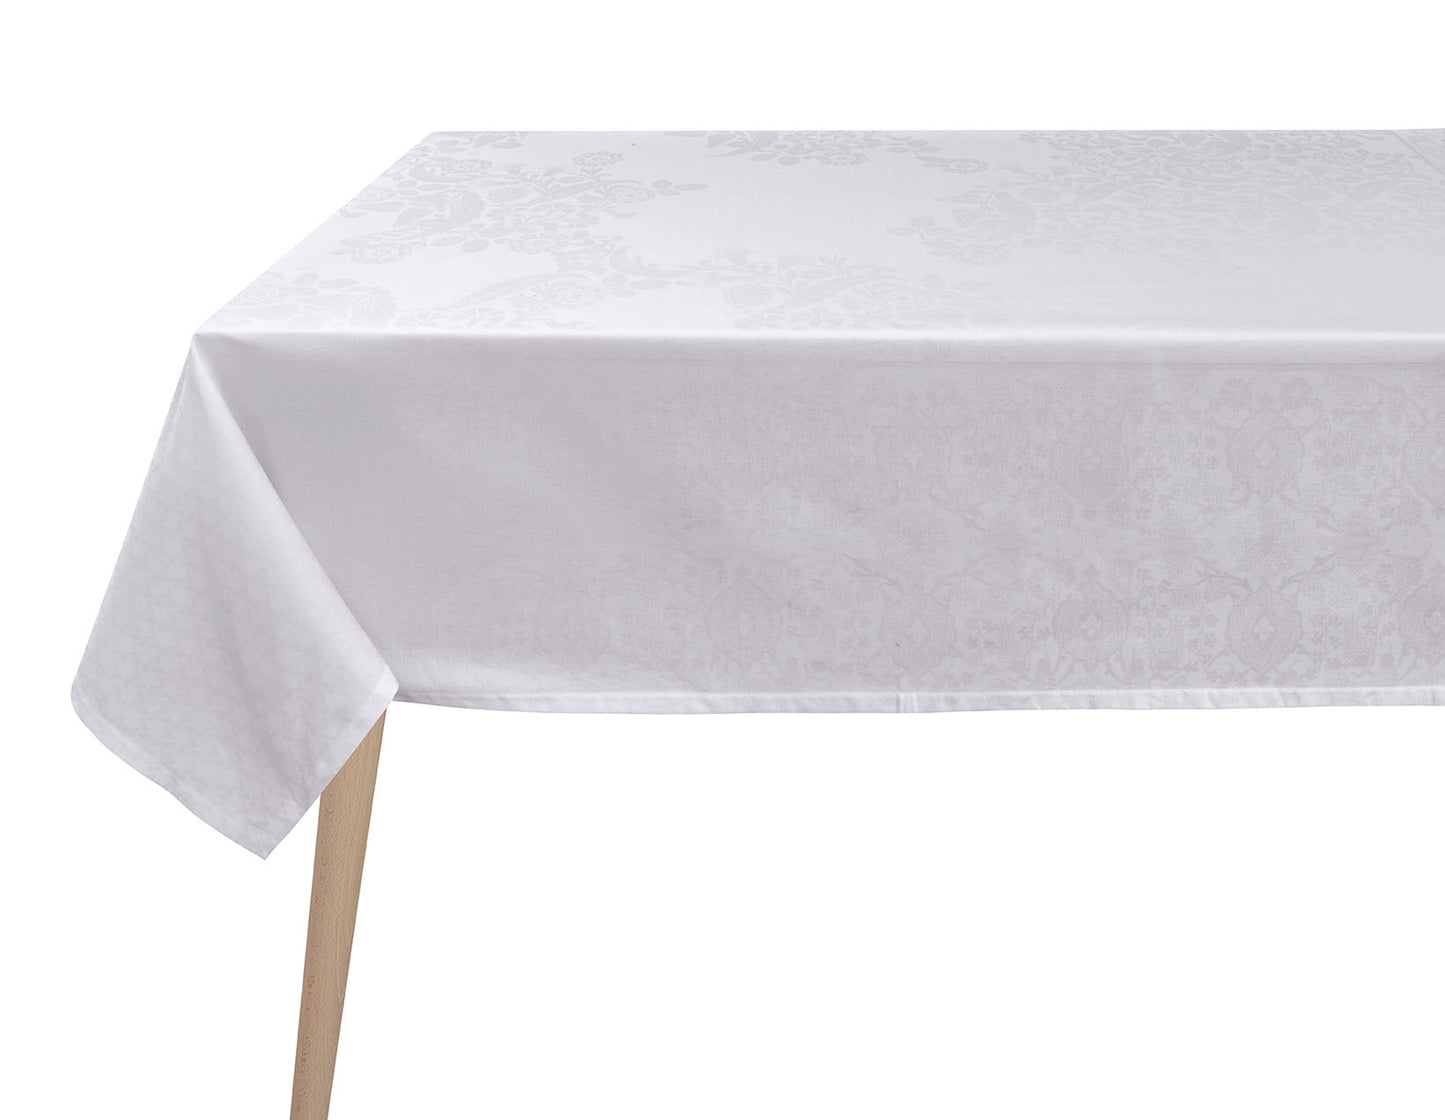 Voyage Iconique - Tablecloth, Napkins & Runners